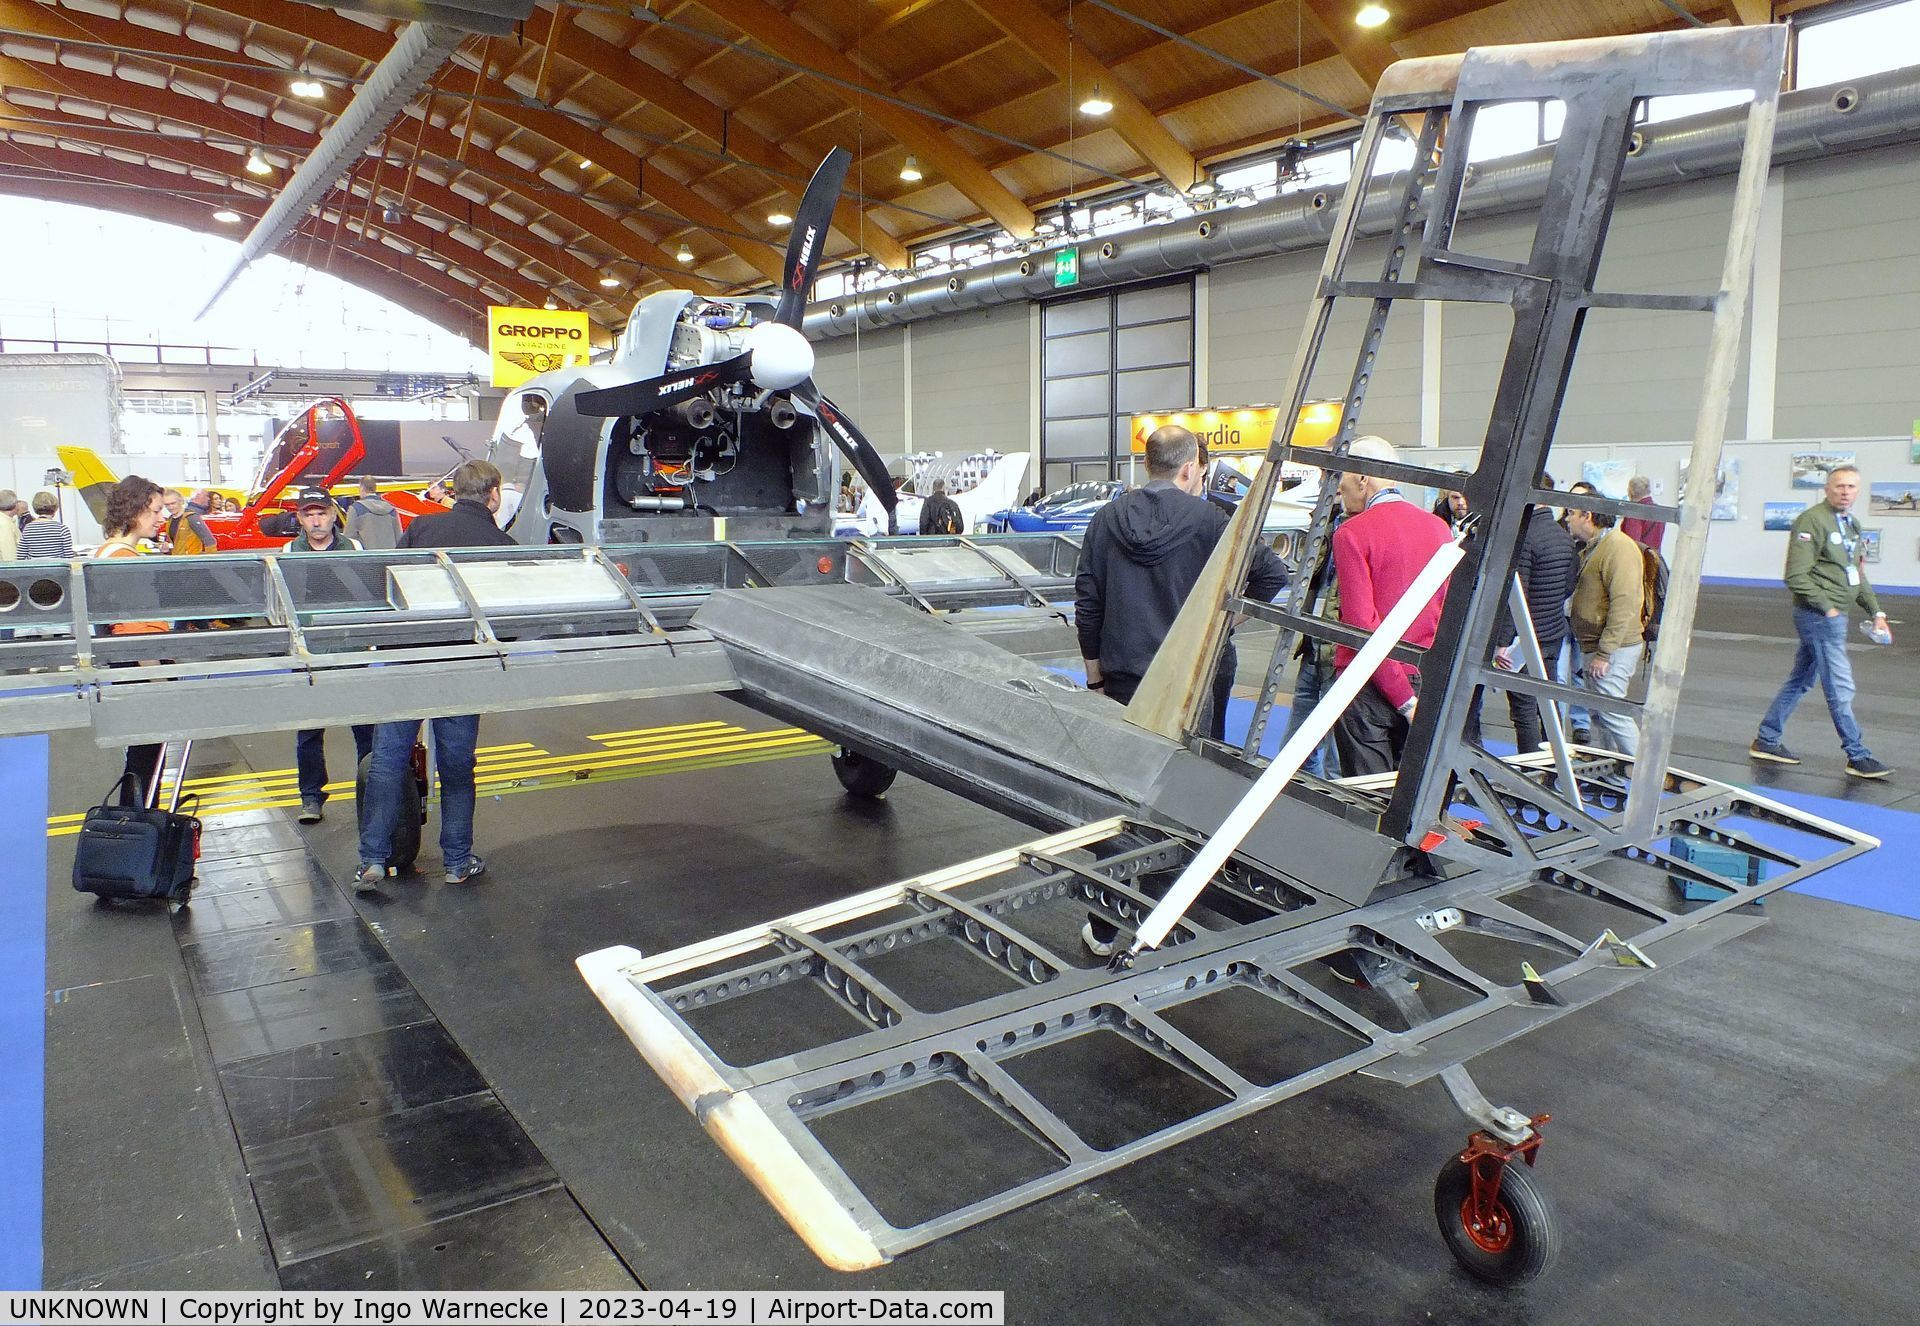 UNKNOWN, 2023 Airconcept Observer C/N 01, Airconcept Observer prototype (still incomplete) at the AERO 2023, Friedrichshafen